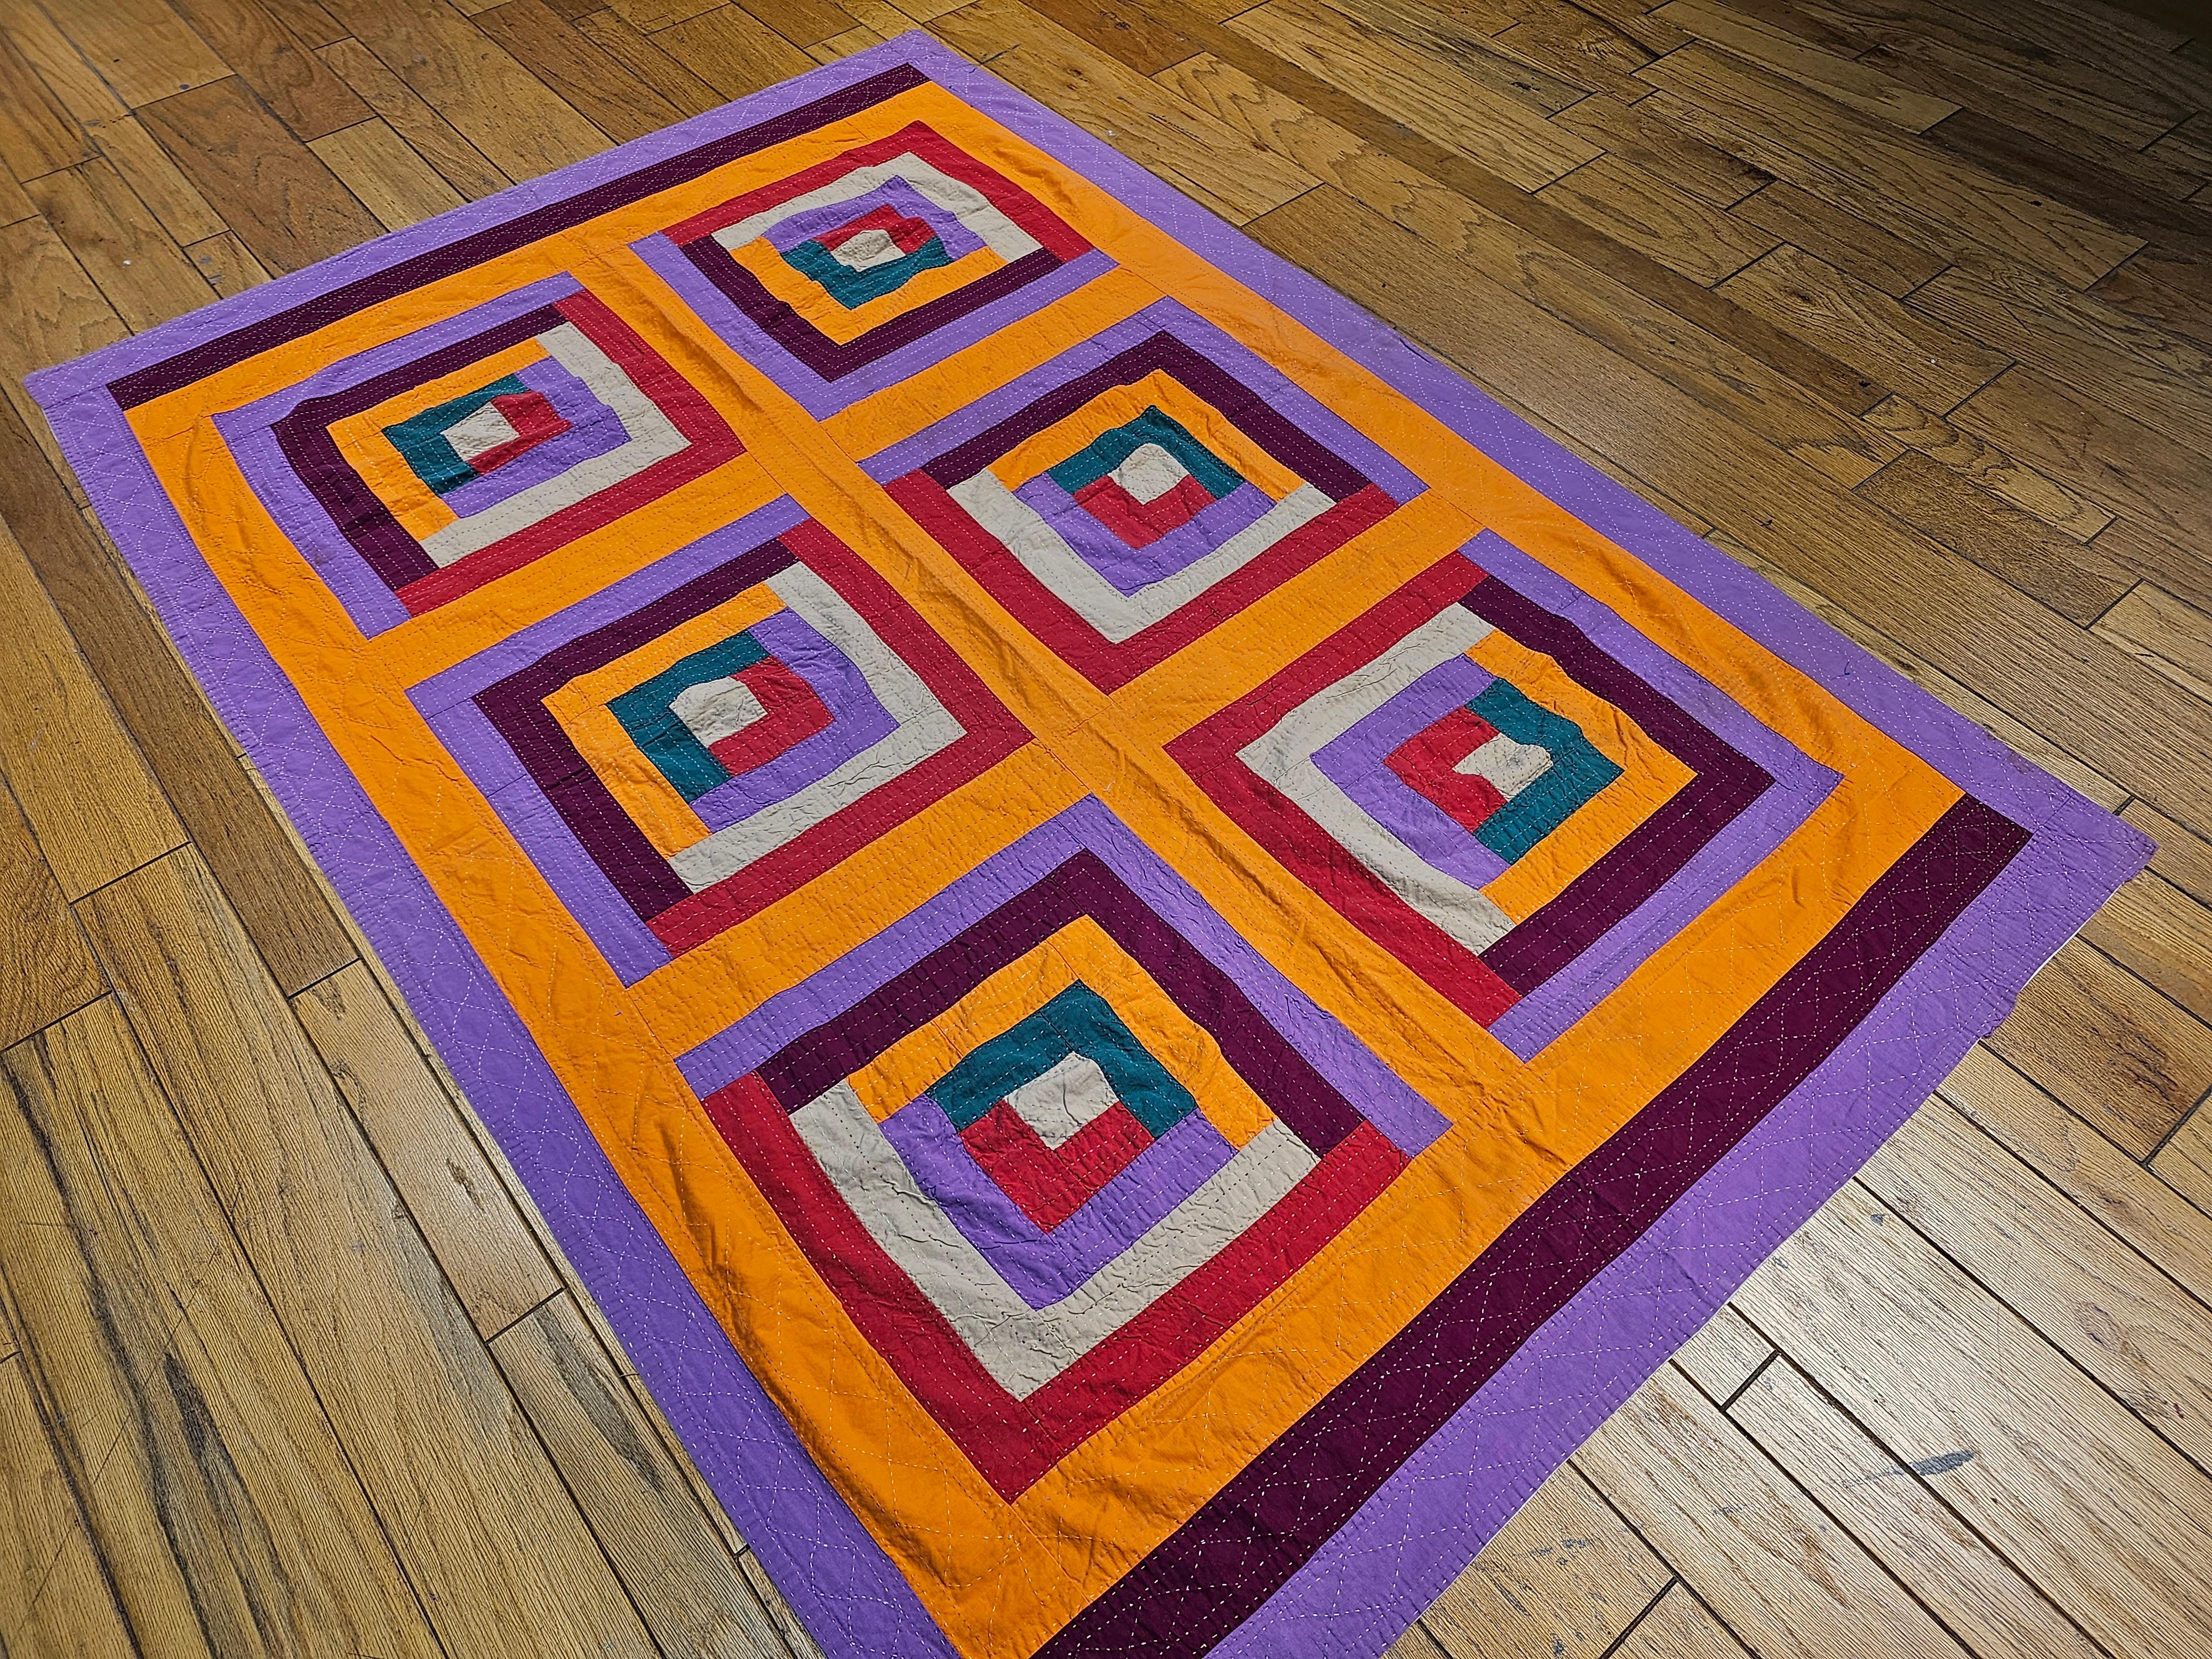 Mid 20th Century African American Southern Quilt in Red, Purple, Green, Orange For Sale 5